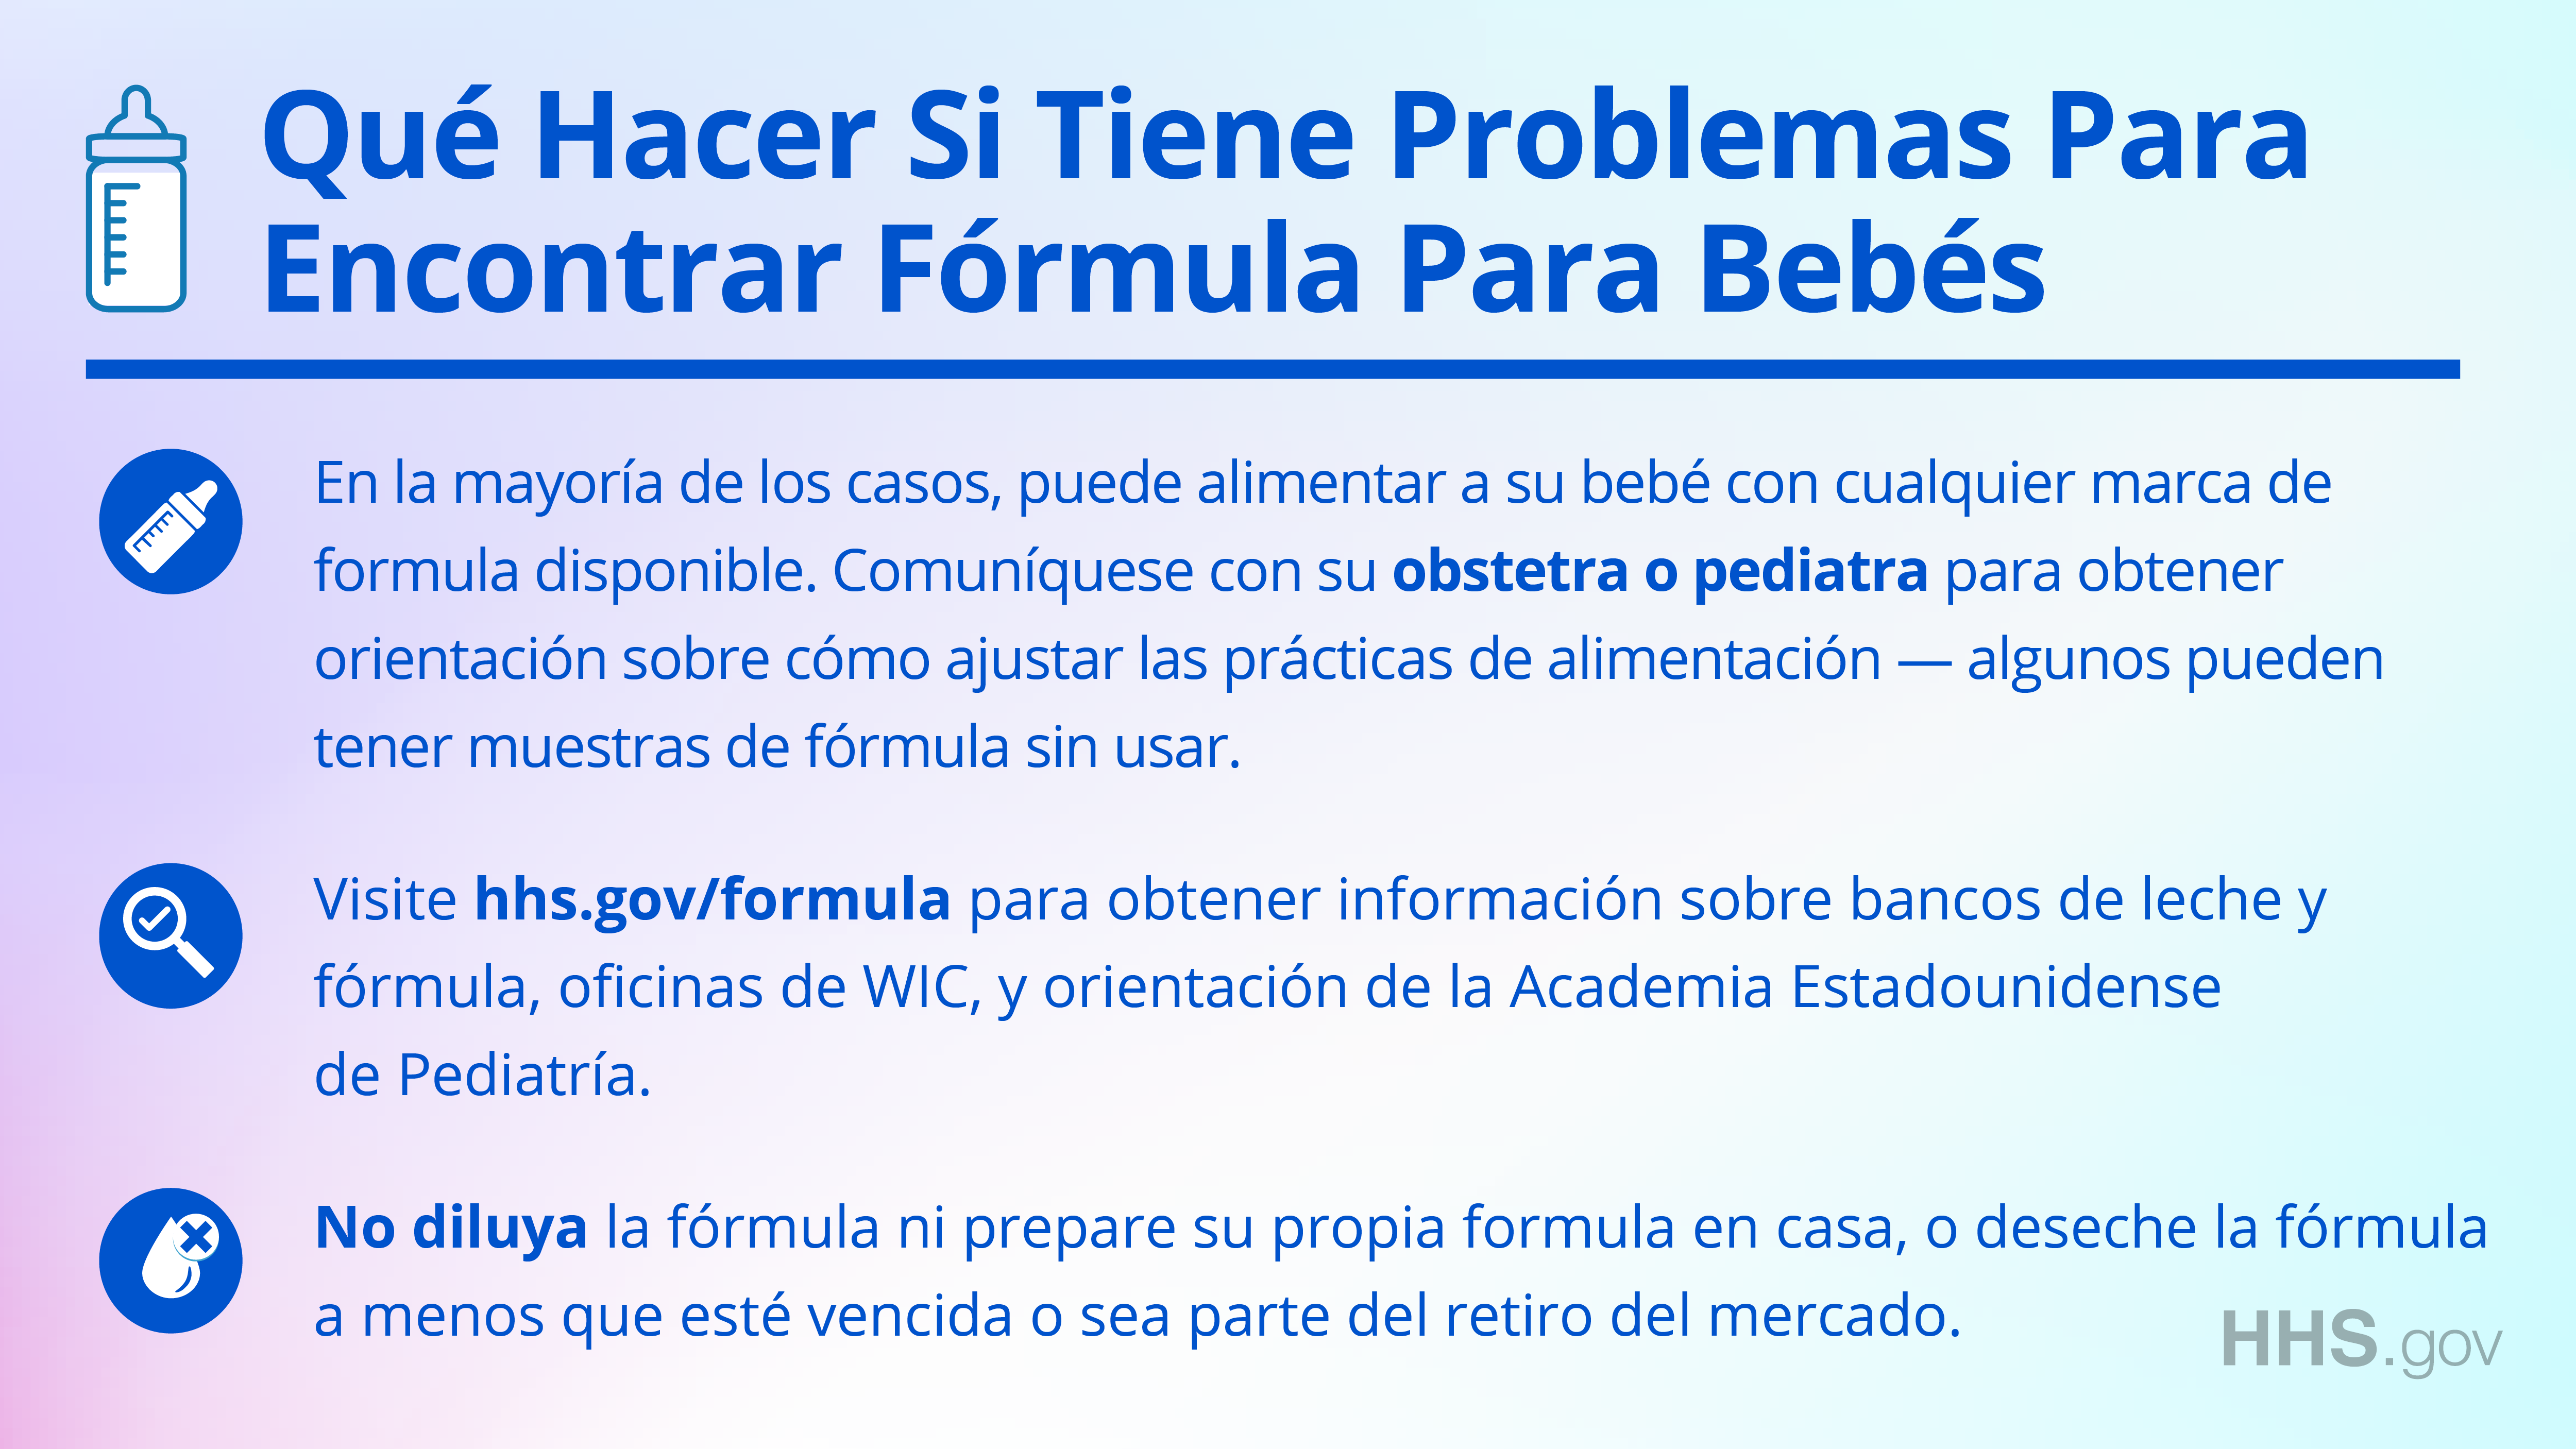 Facebook/Twitter graphic explaining in Spanish what to do if you're having trouble finding baby formula. In most cases, you can feed you baby any brand of formula that is available. Contact your OB/GYN or pediatrician for guidance on adjusting feeding practices - some may have unused formula samples. Second, visit hhs.gov/formula for information on milk and formula banks, WIC offices, and guidance from the American Academy of Pediatrics. Third, do not water down formula, make formula at home, or discard formula unless it is expired or is part of the recall.